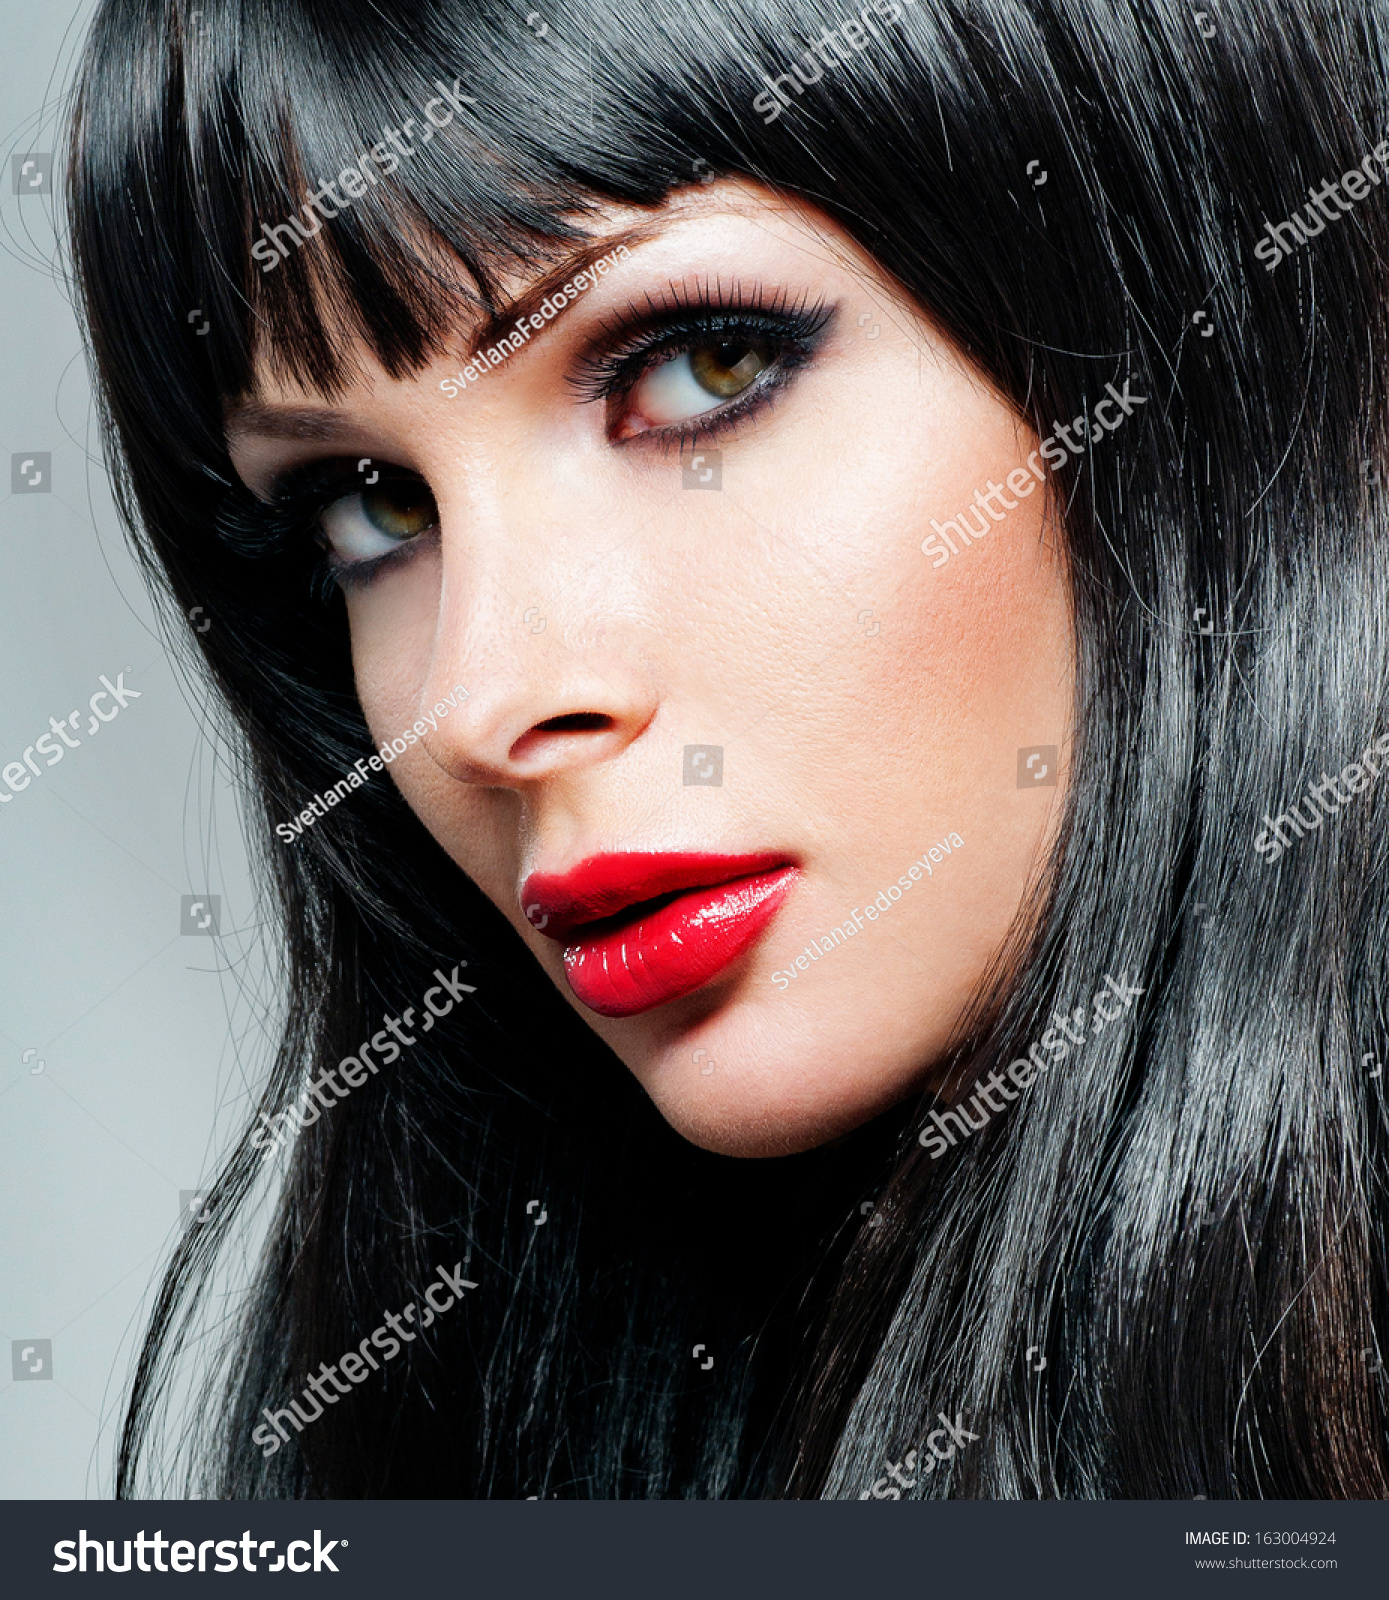 Black Hair Fashion Girl Portrait Long Hair And Red Lipstick Stock